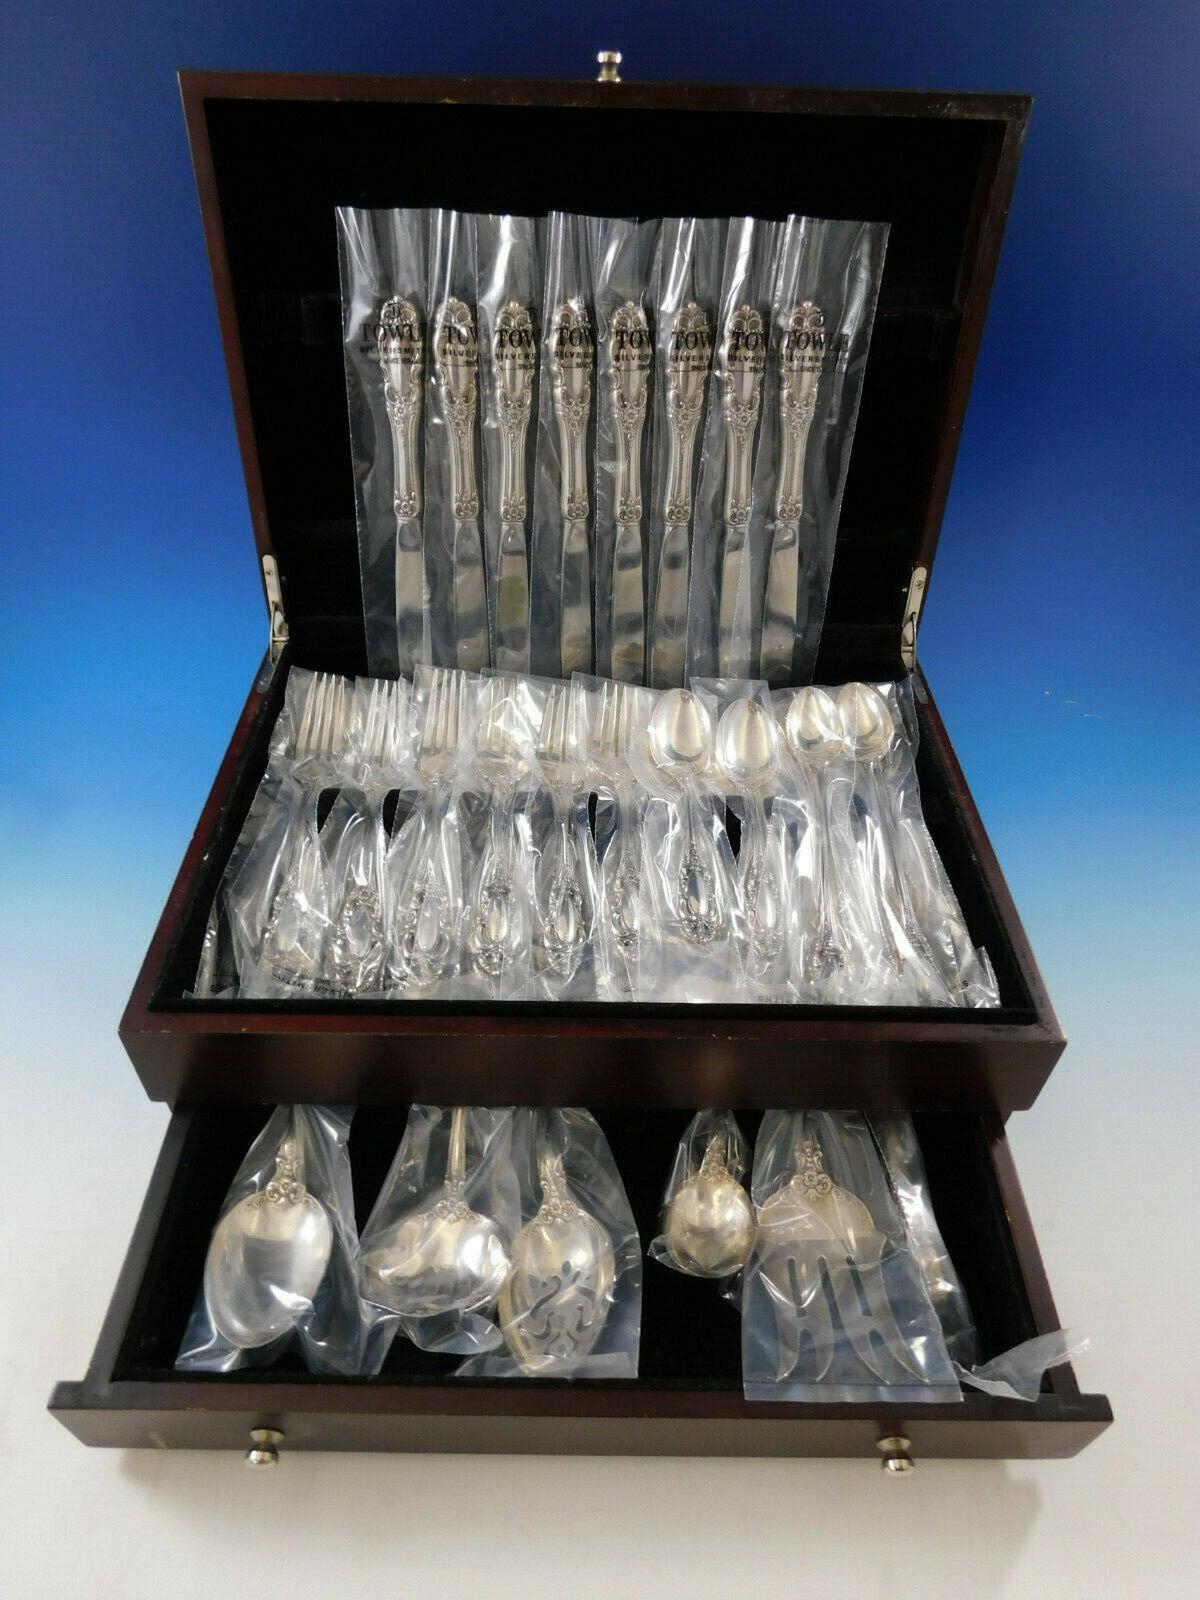 New, unused Grand Duchess by Towle Sterling Silver Flatware set - 46 pieces. This set includes:

 8 knives, 9 1/4